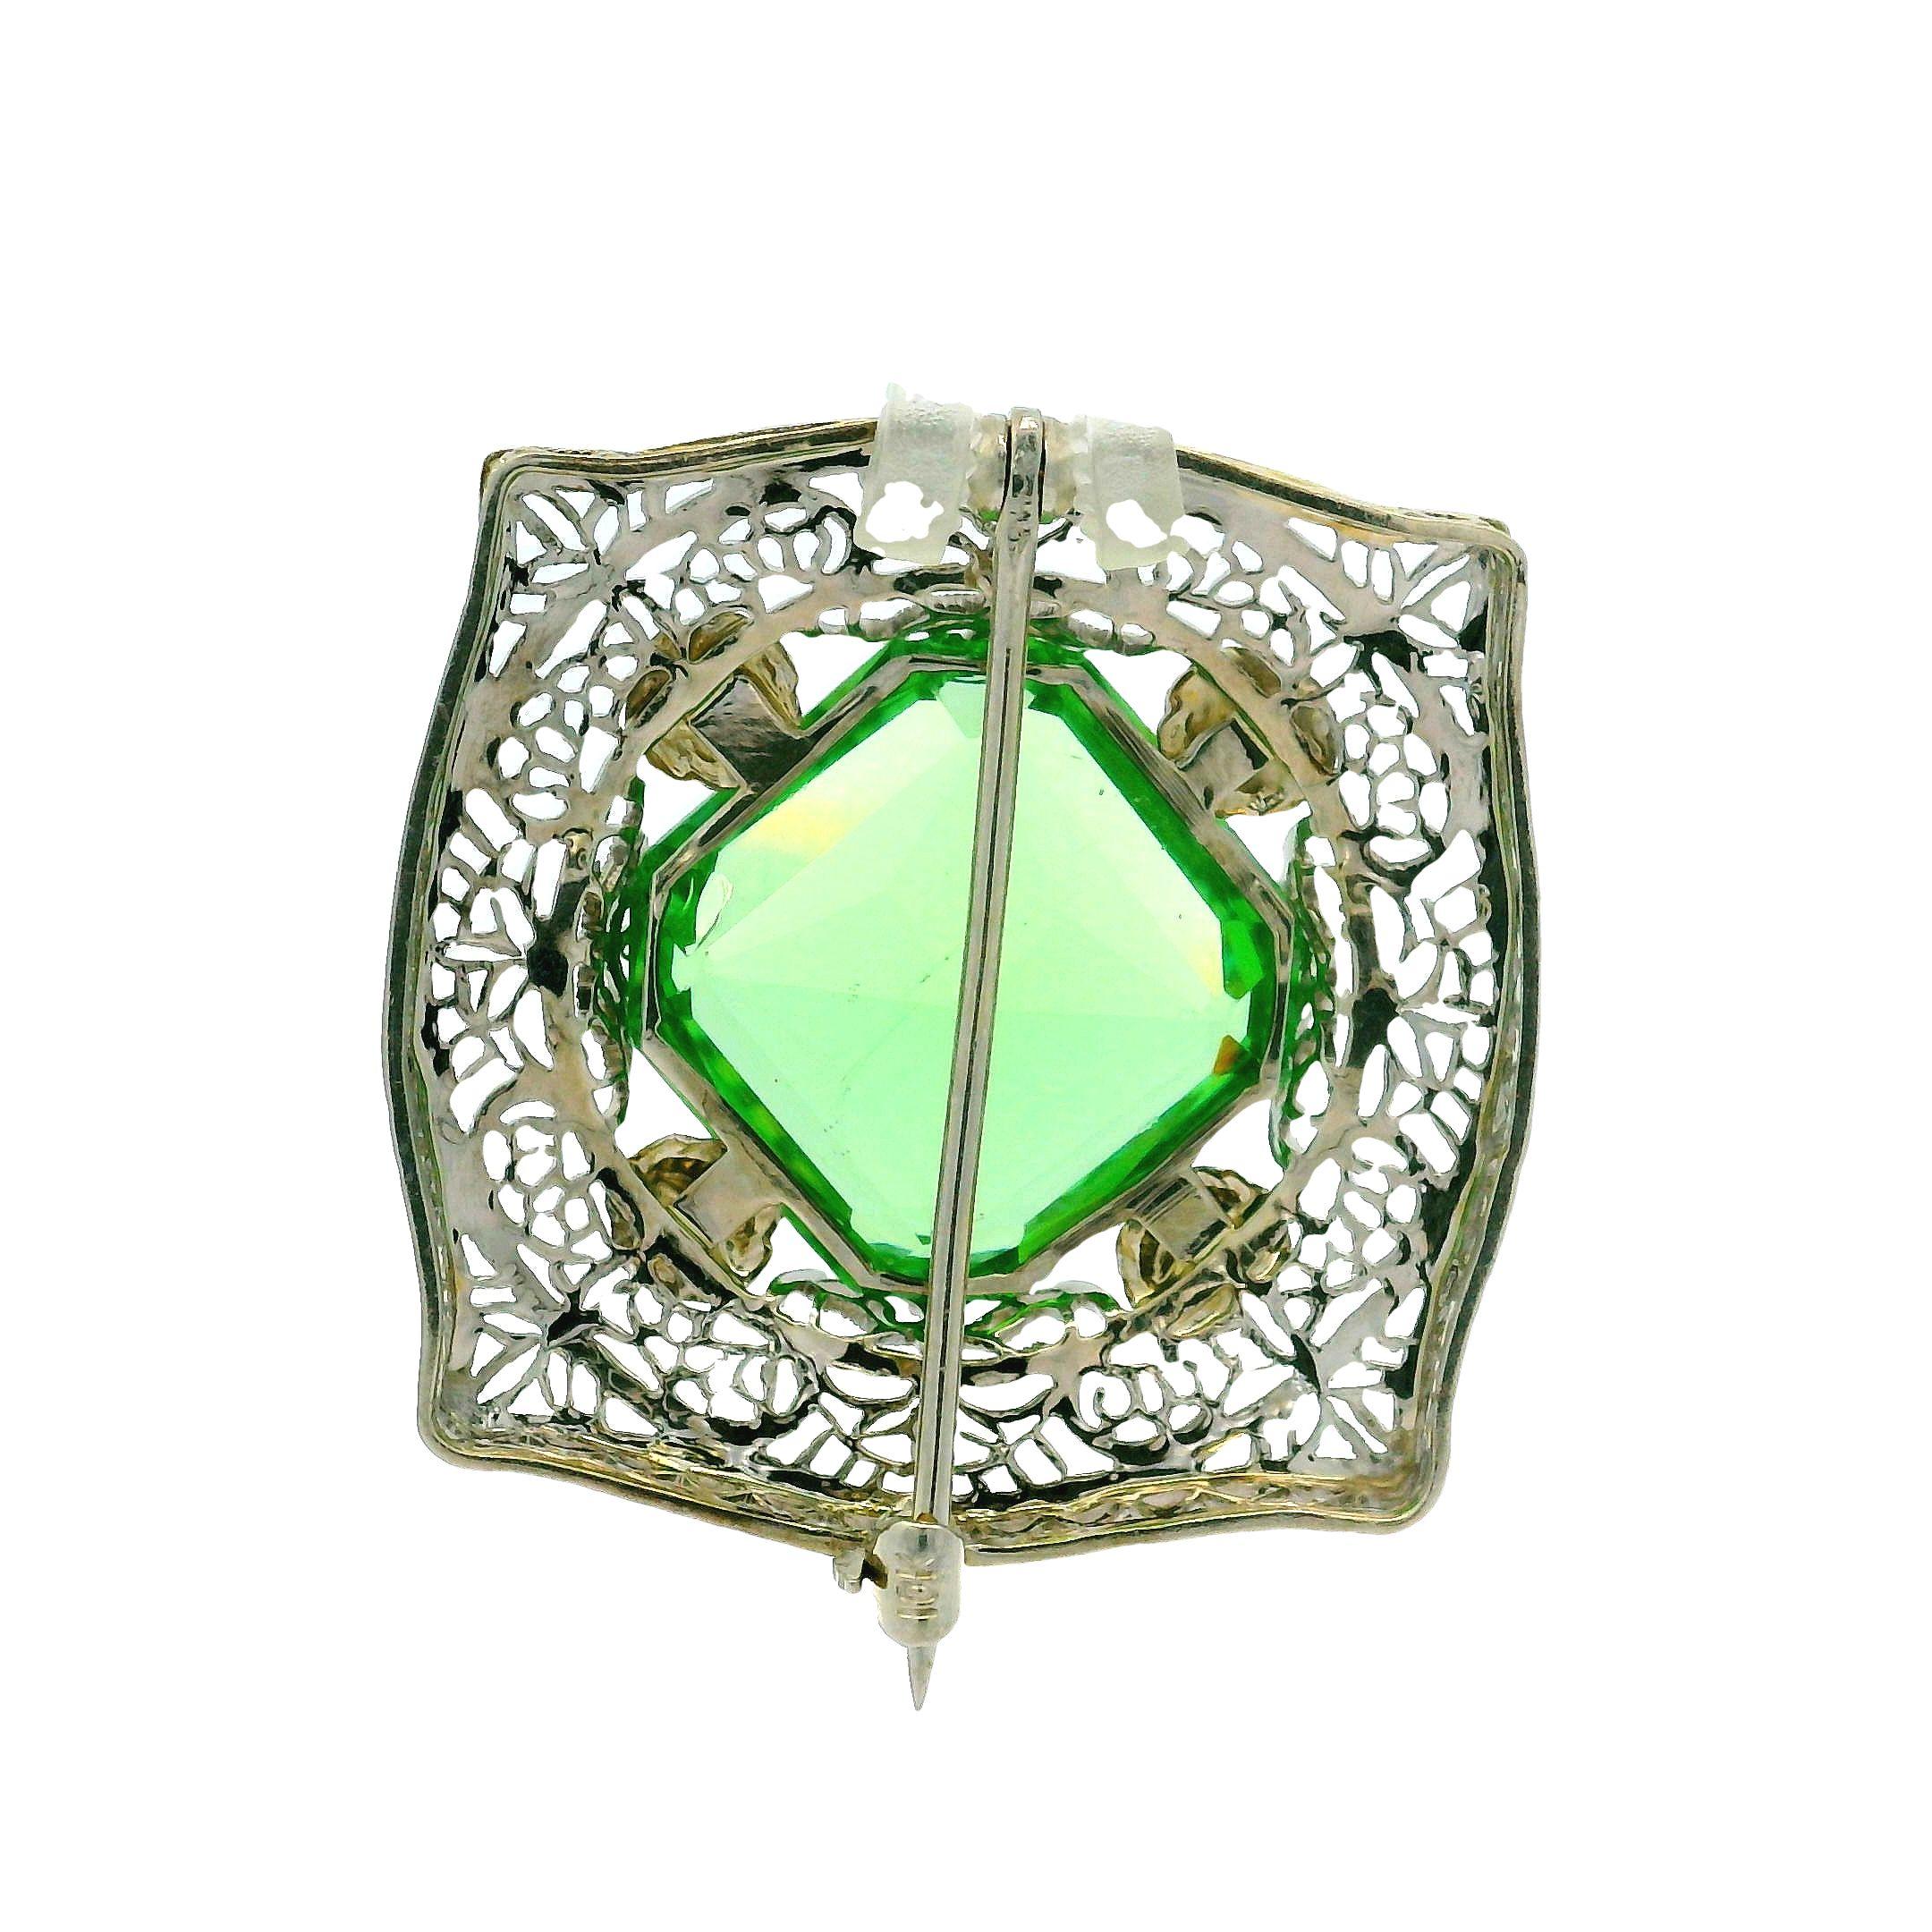 –Stone(s)–
(1) Lab Grown Stone - Rounded Square Shape - Filigree Prong Set - Vivid Green Color - 15.14mm (approx.)
Material: 10k white Gold - Yellow Gold Accents
Weight: 6.56 Grams
Overall Height: 28.32mm (1.11